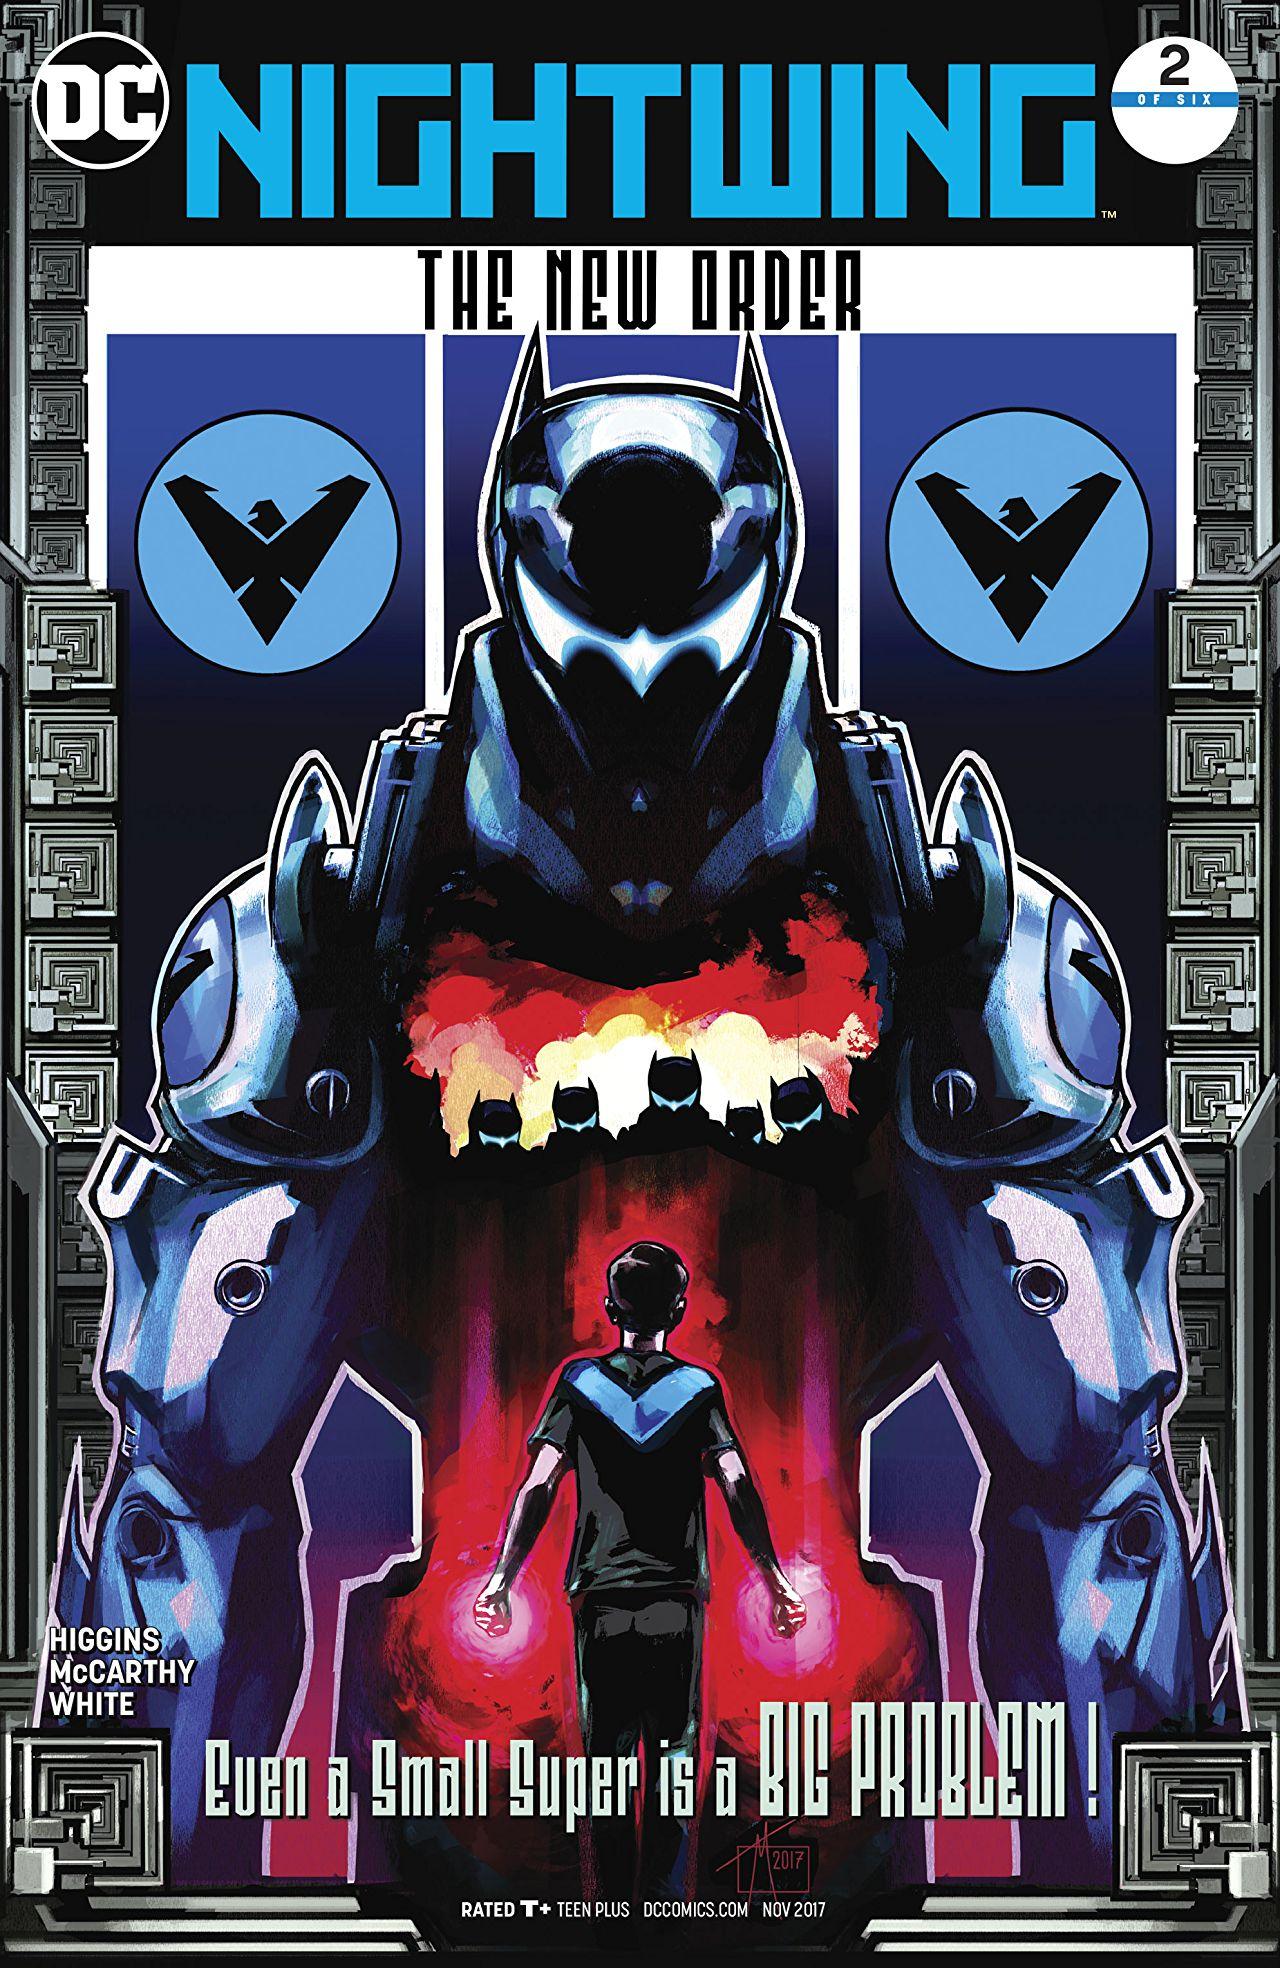 Nightwing: The New Order Vol. 1 #2